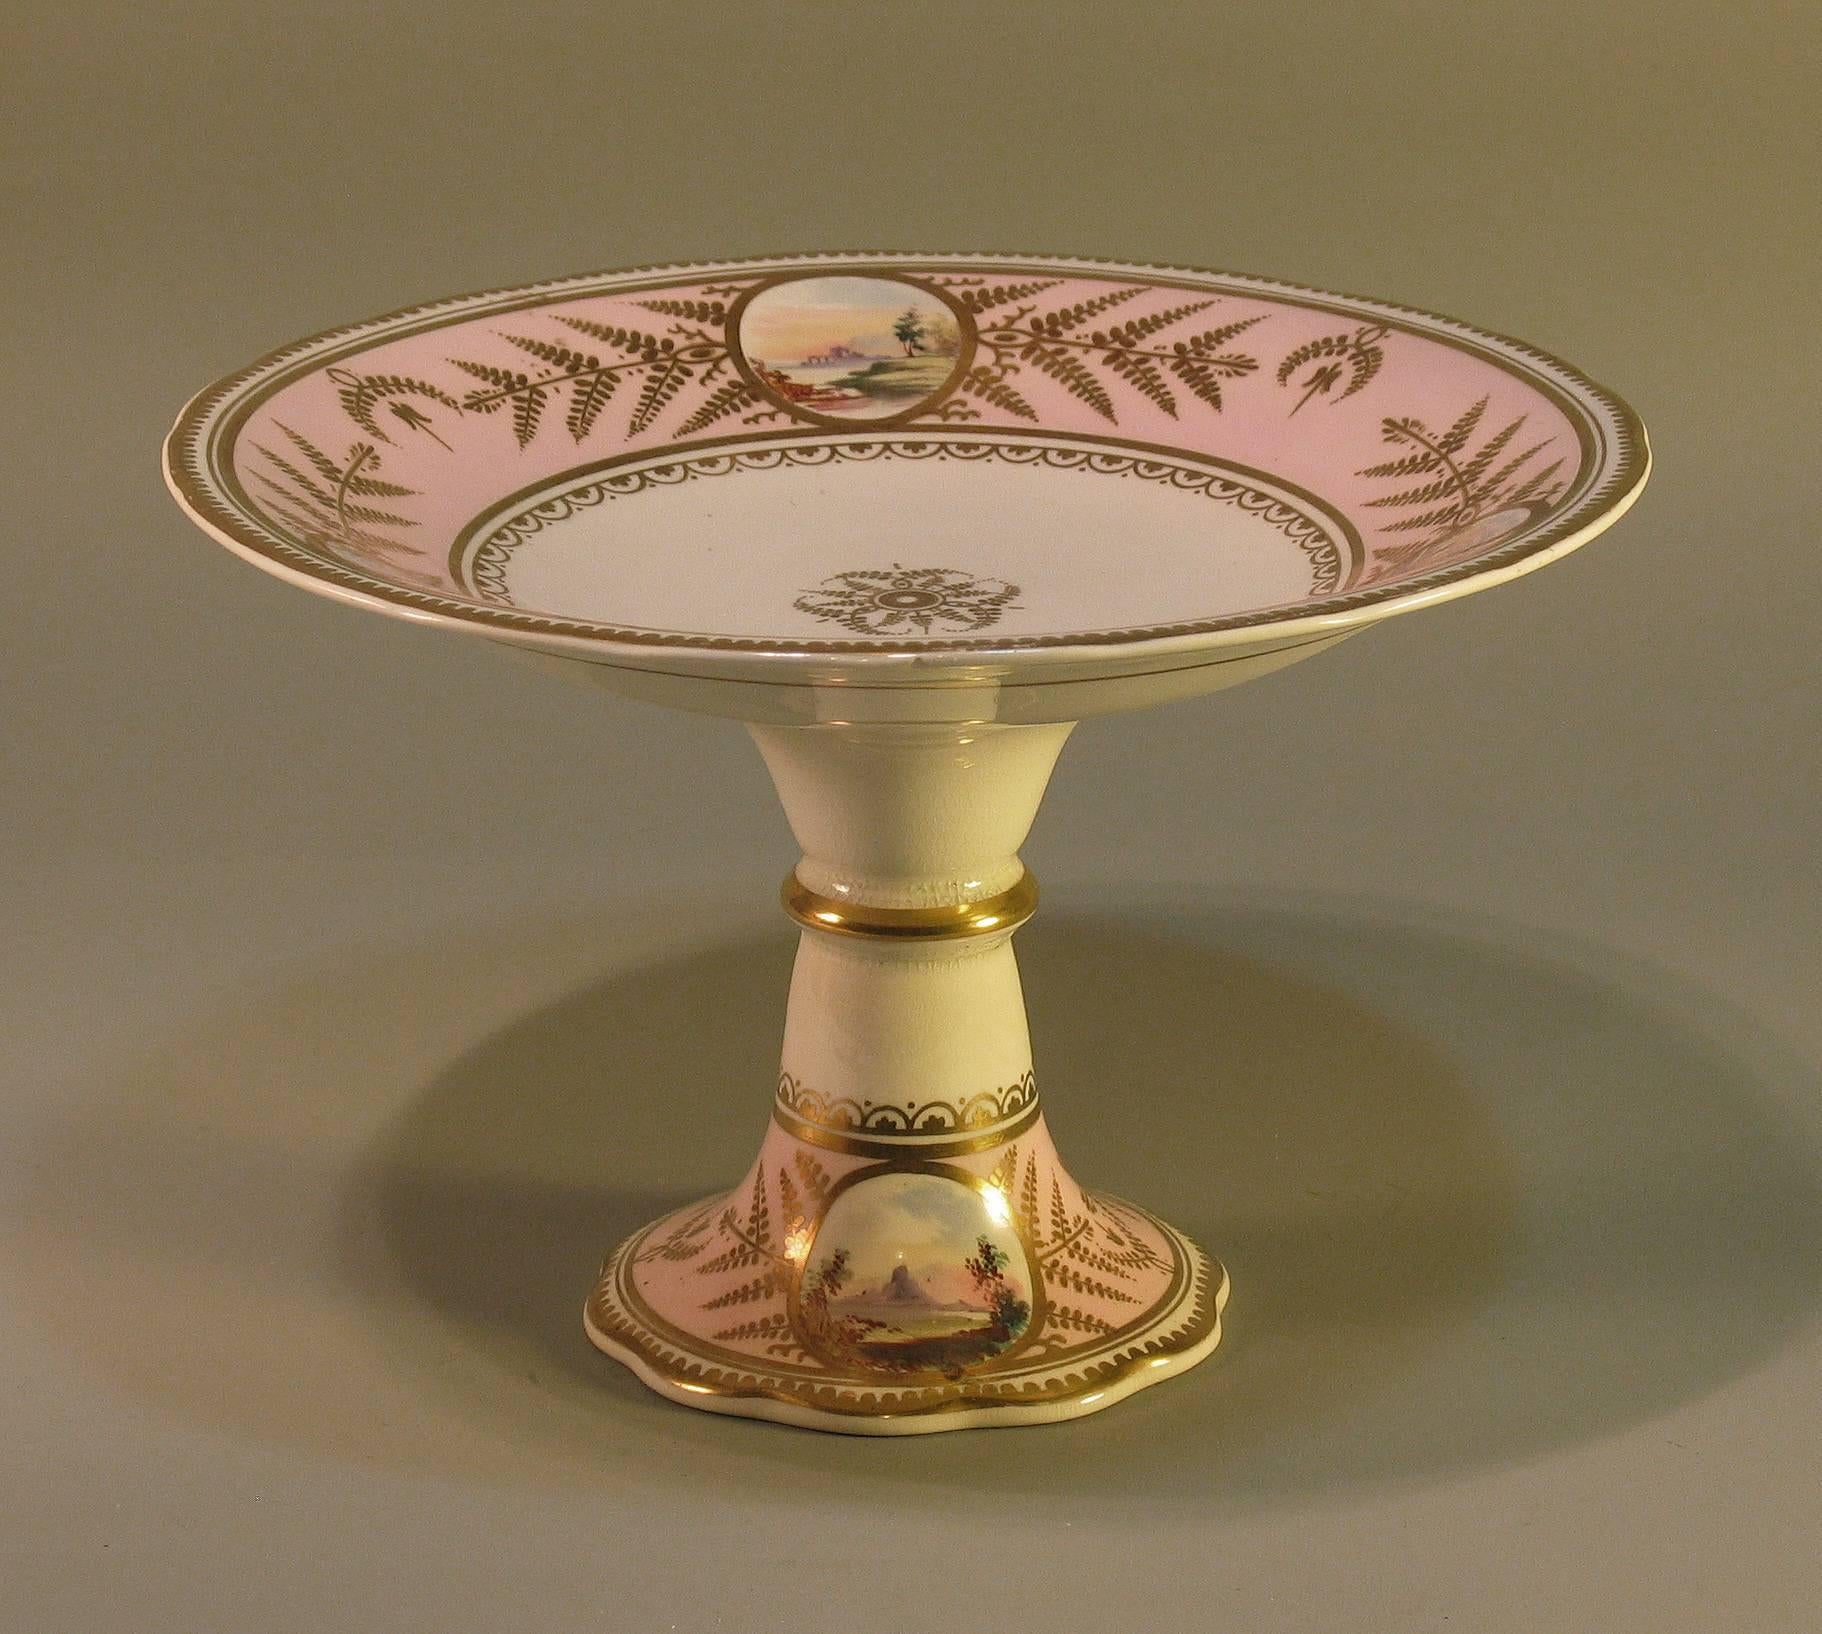 English Scenic Porcelain Dessert Service, Mid-19th Century In Good Condition For Sale In Ottawa, Ontario